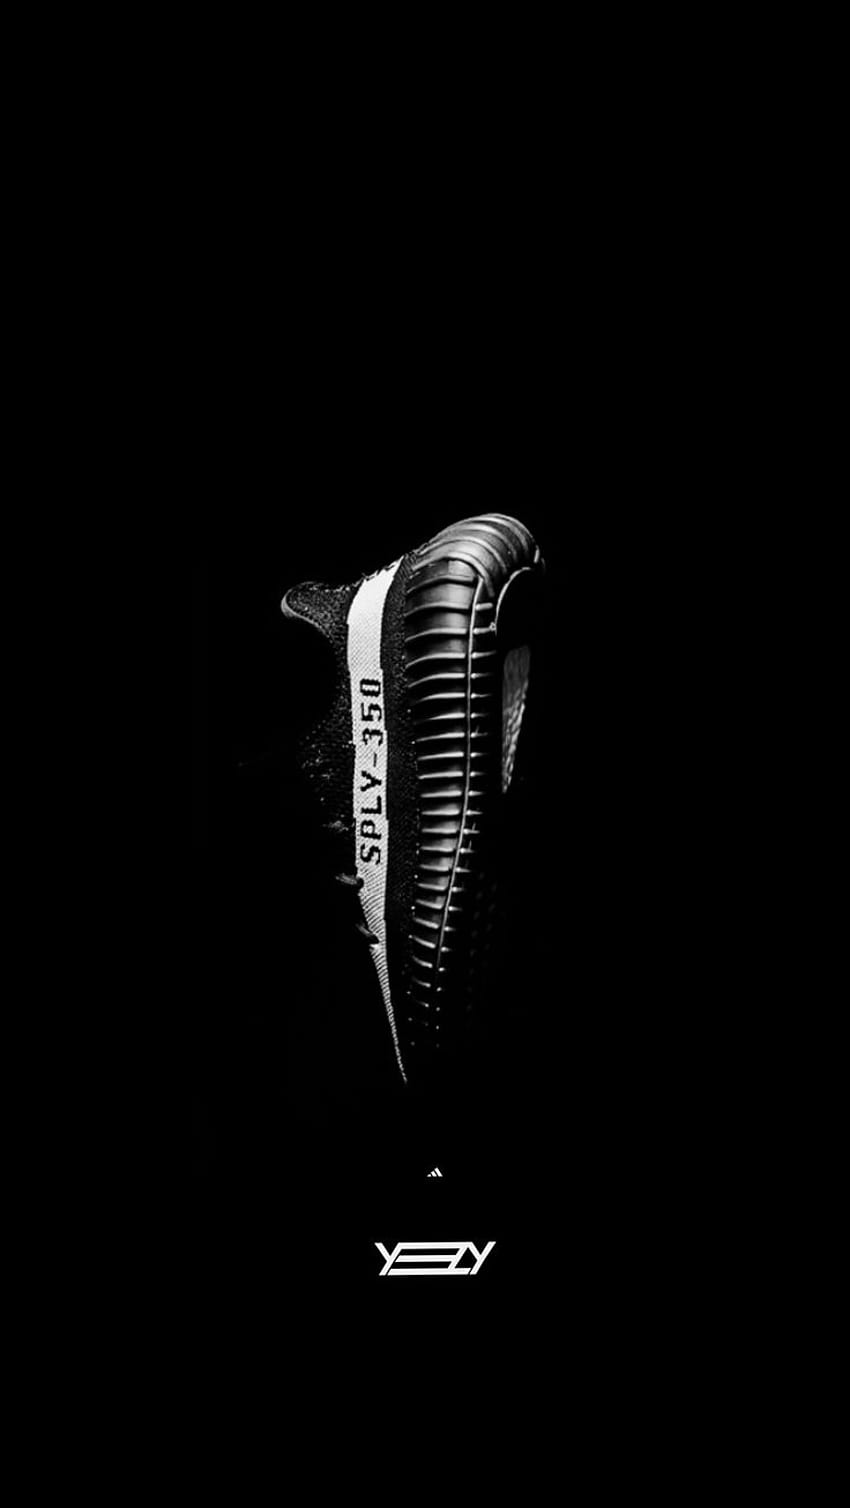 Pin on Sneakers, yeezy shoes HD phone wallpaper